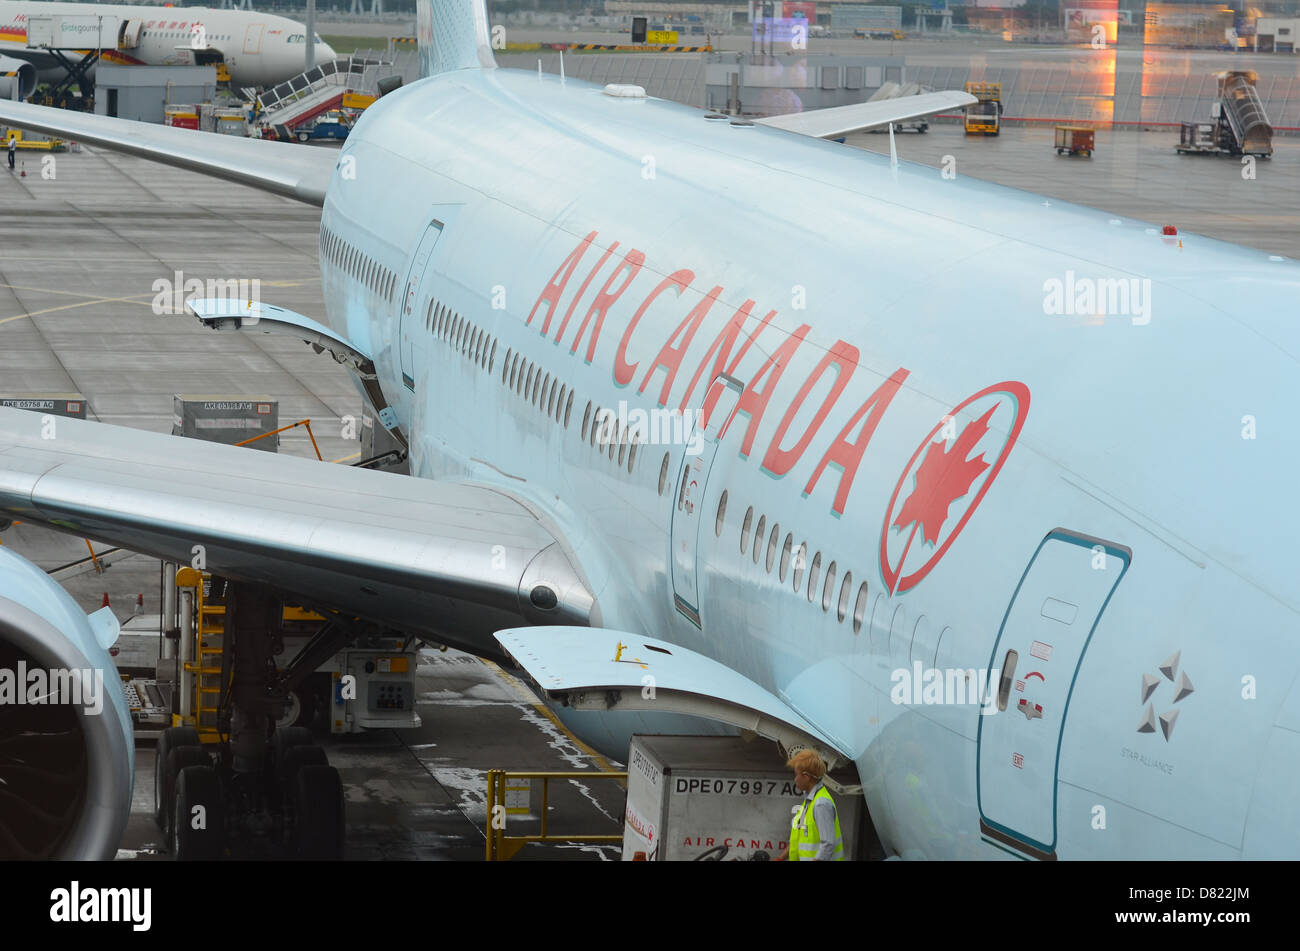 The side of an Air Canada passenger plane. Stock Photo